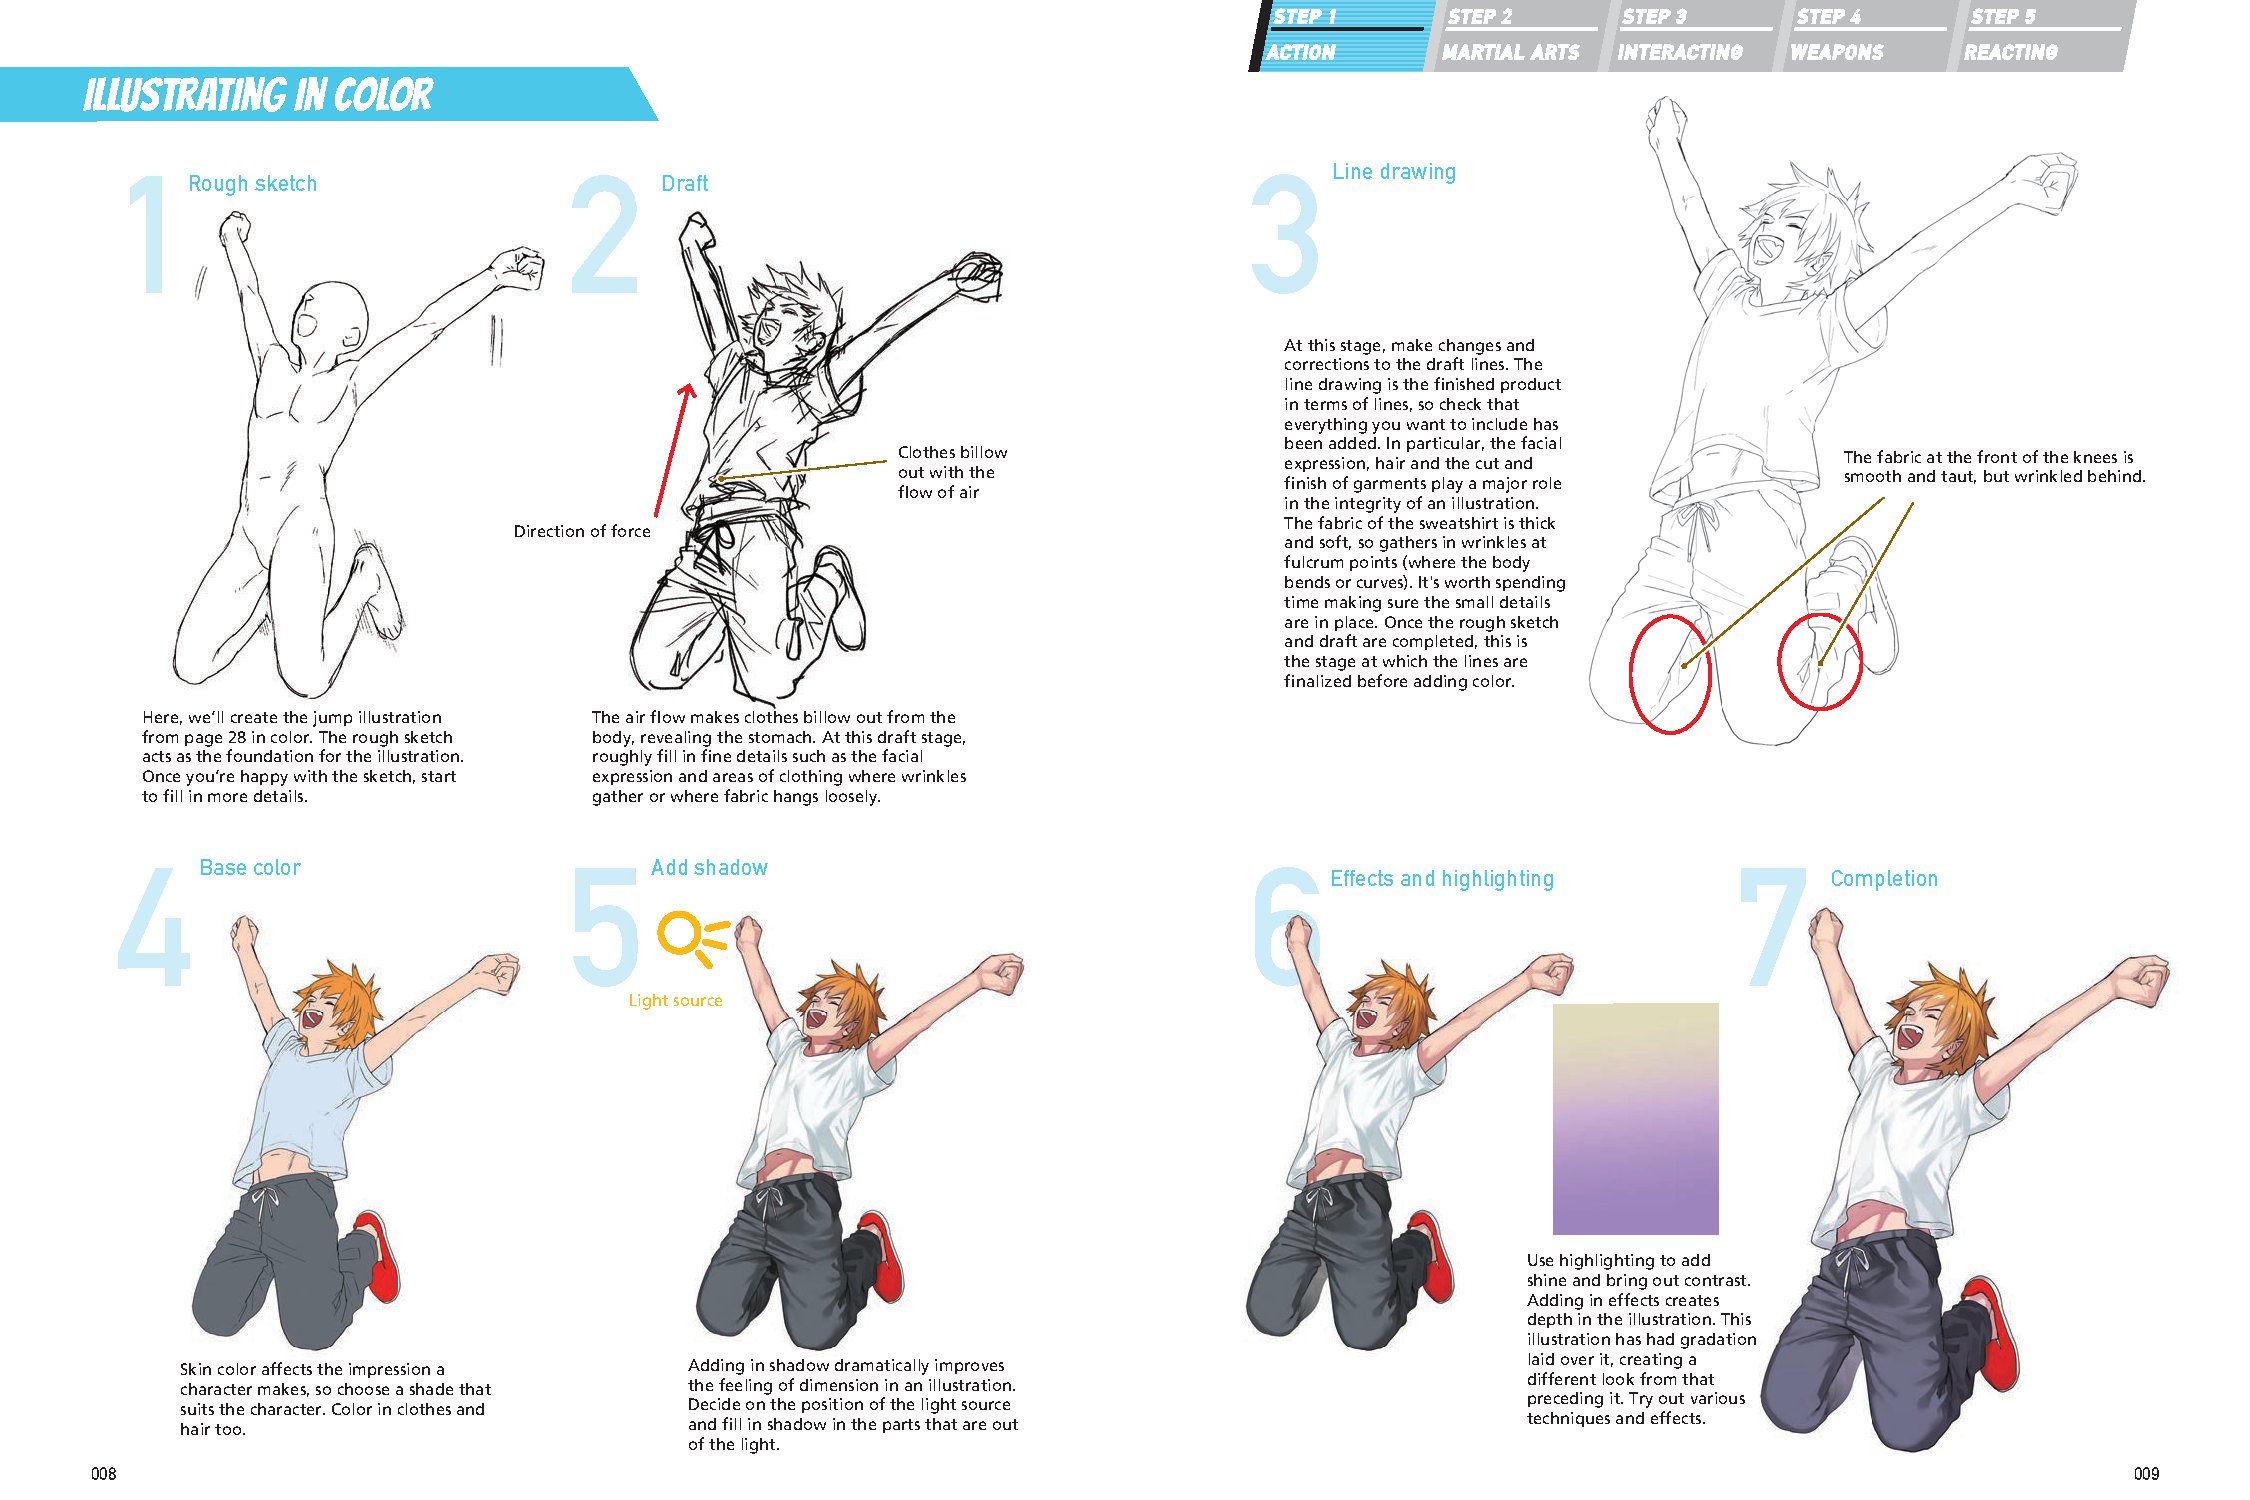 The Complete Guide to Drawing Action Manga